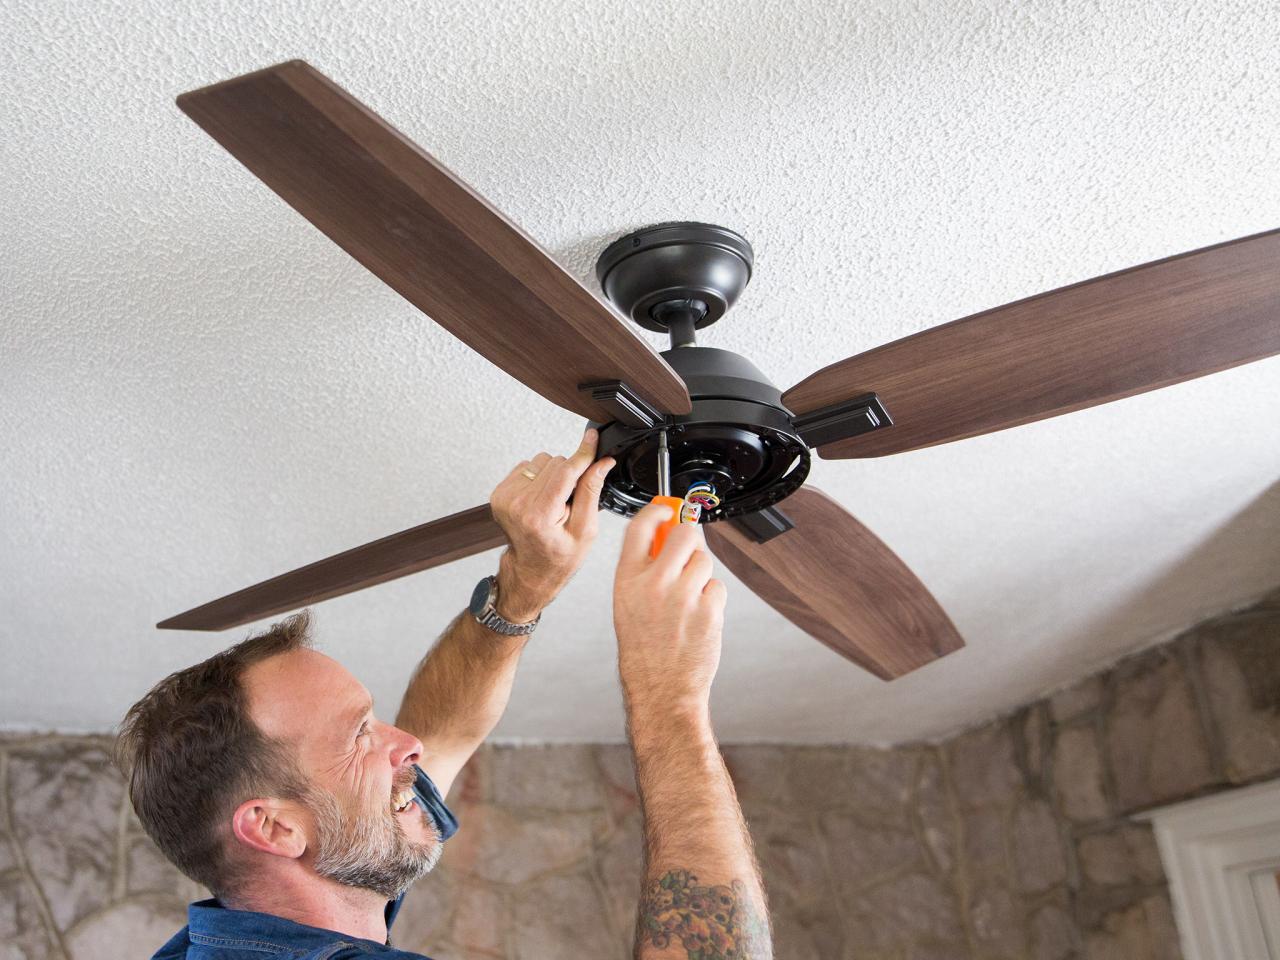 How can I ensure that my ceiling fan is properly installed